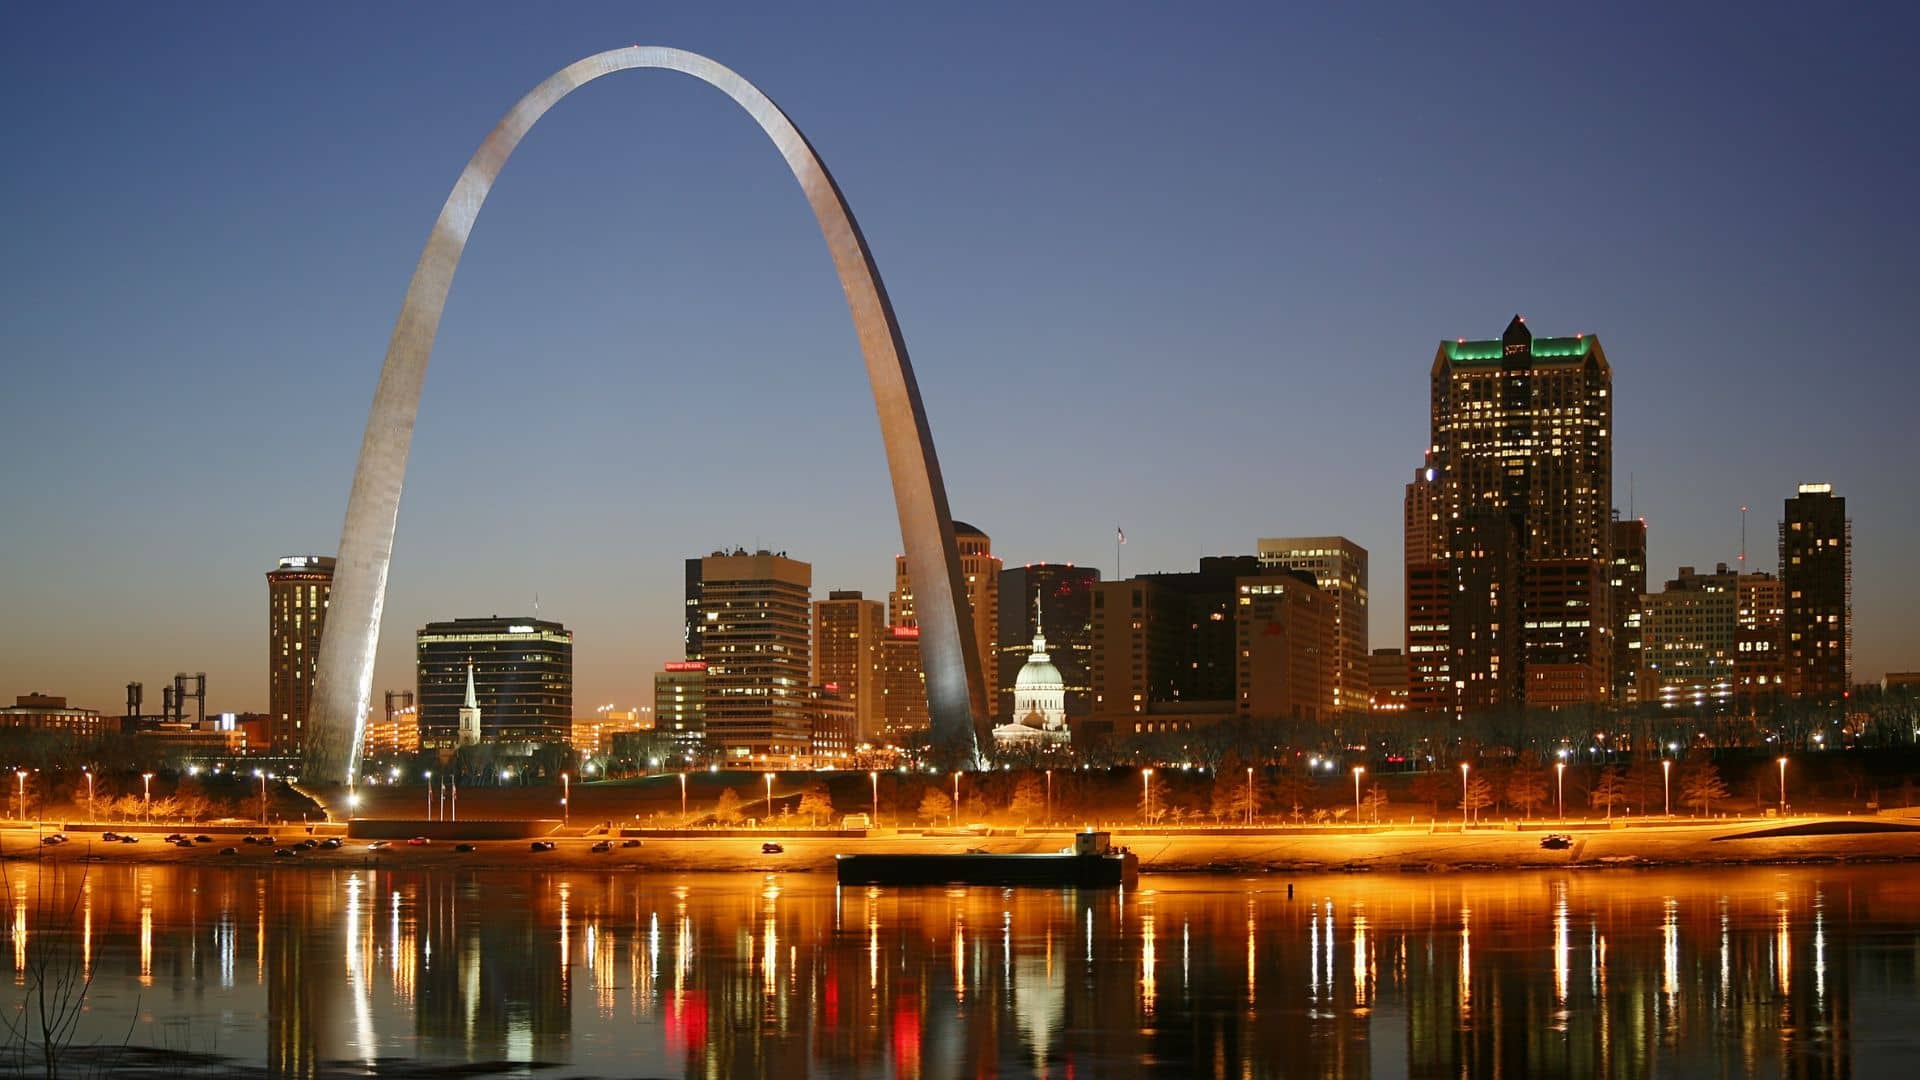 St. Louis nighttime skyline with the Gateway Arch in the foreground.